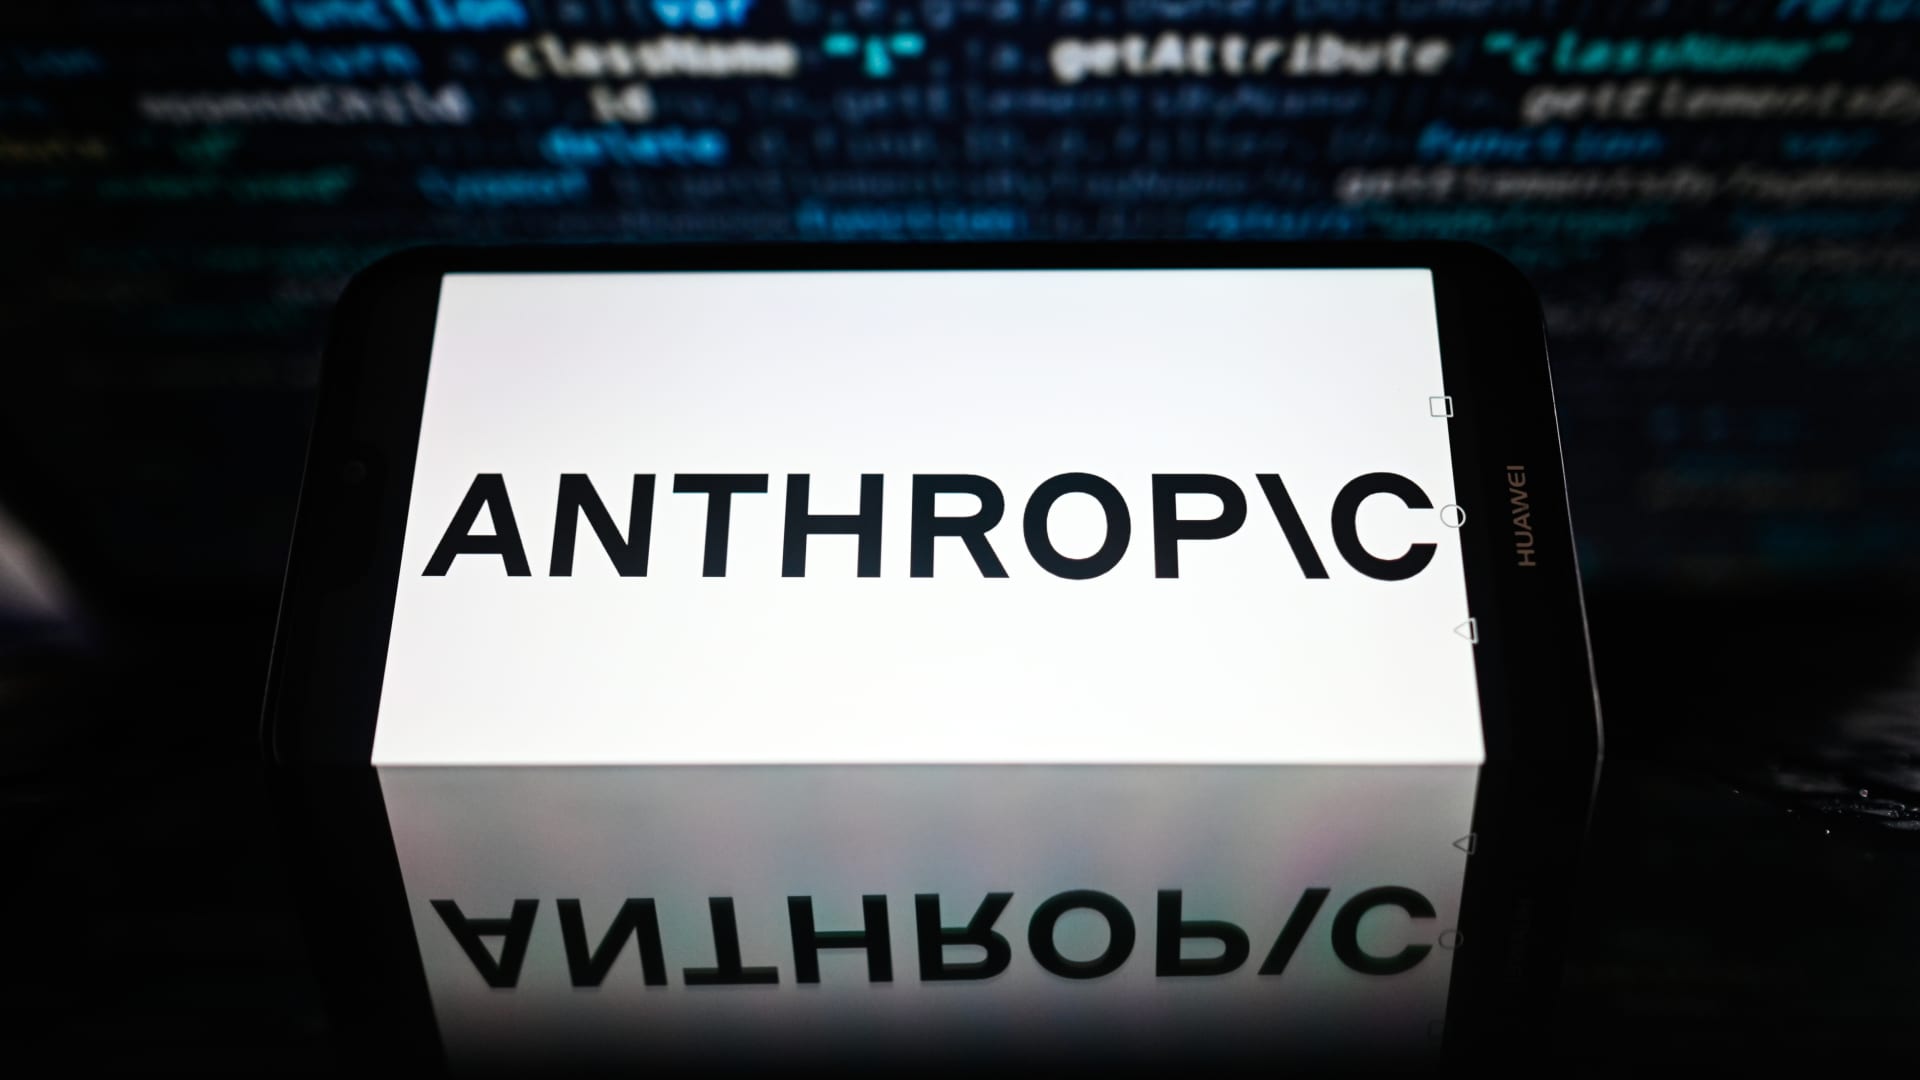 Google-backed Anthropic debuts its most powerful chatbot yet, as generative AI battle heats up